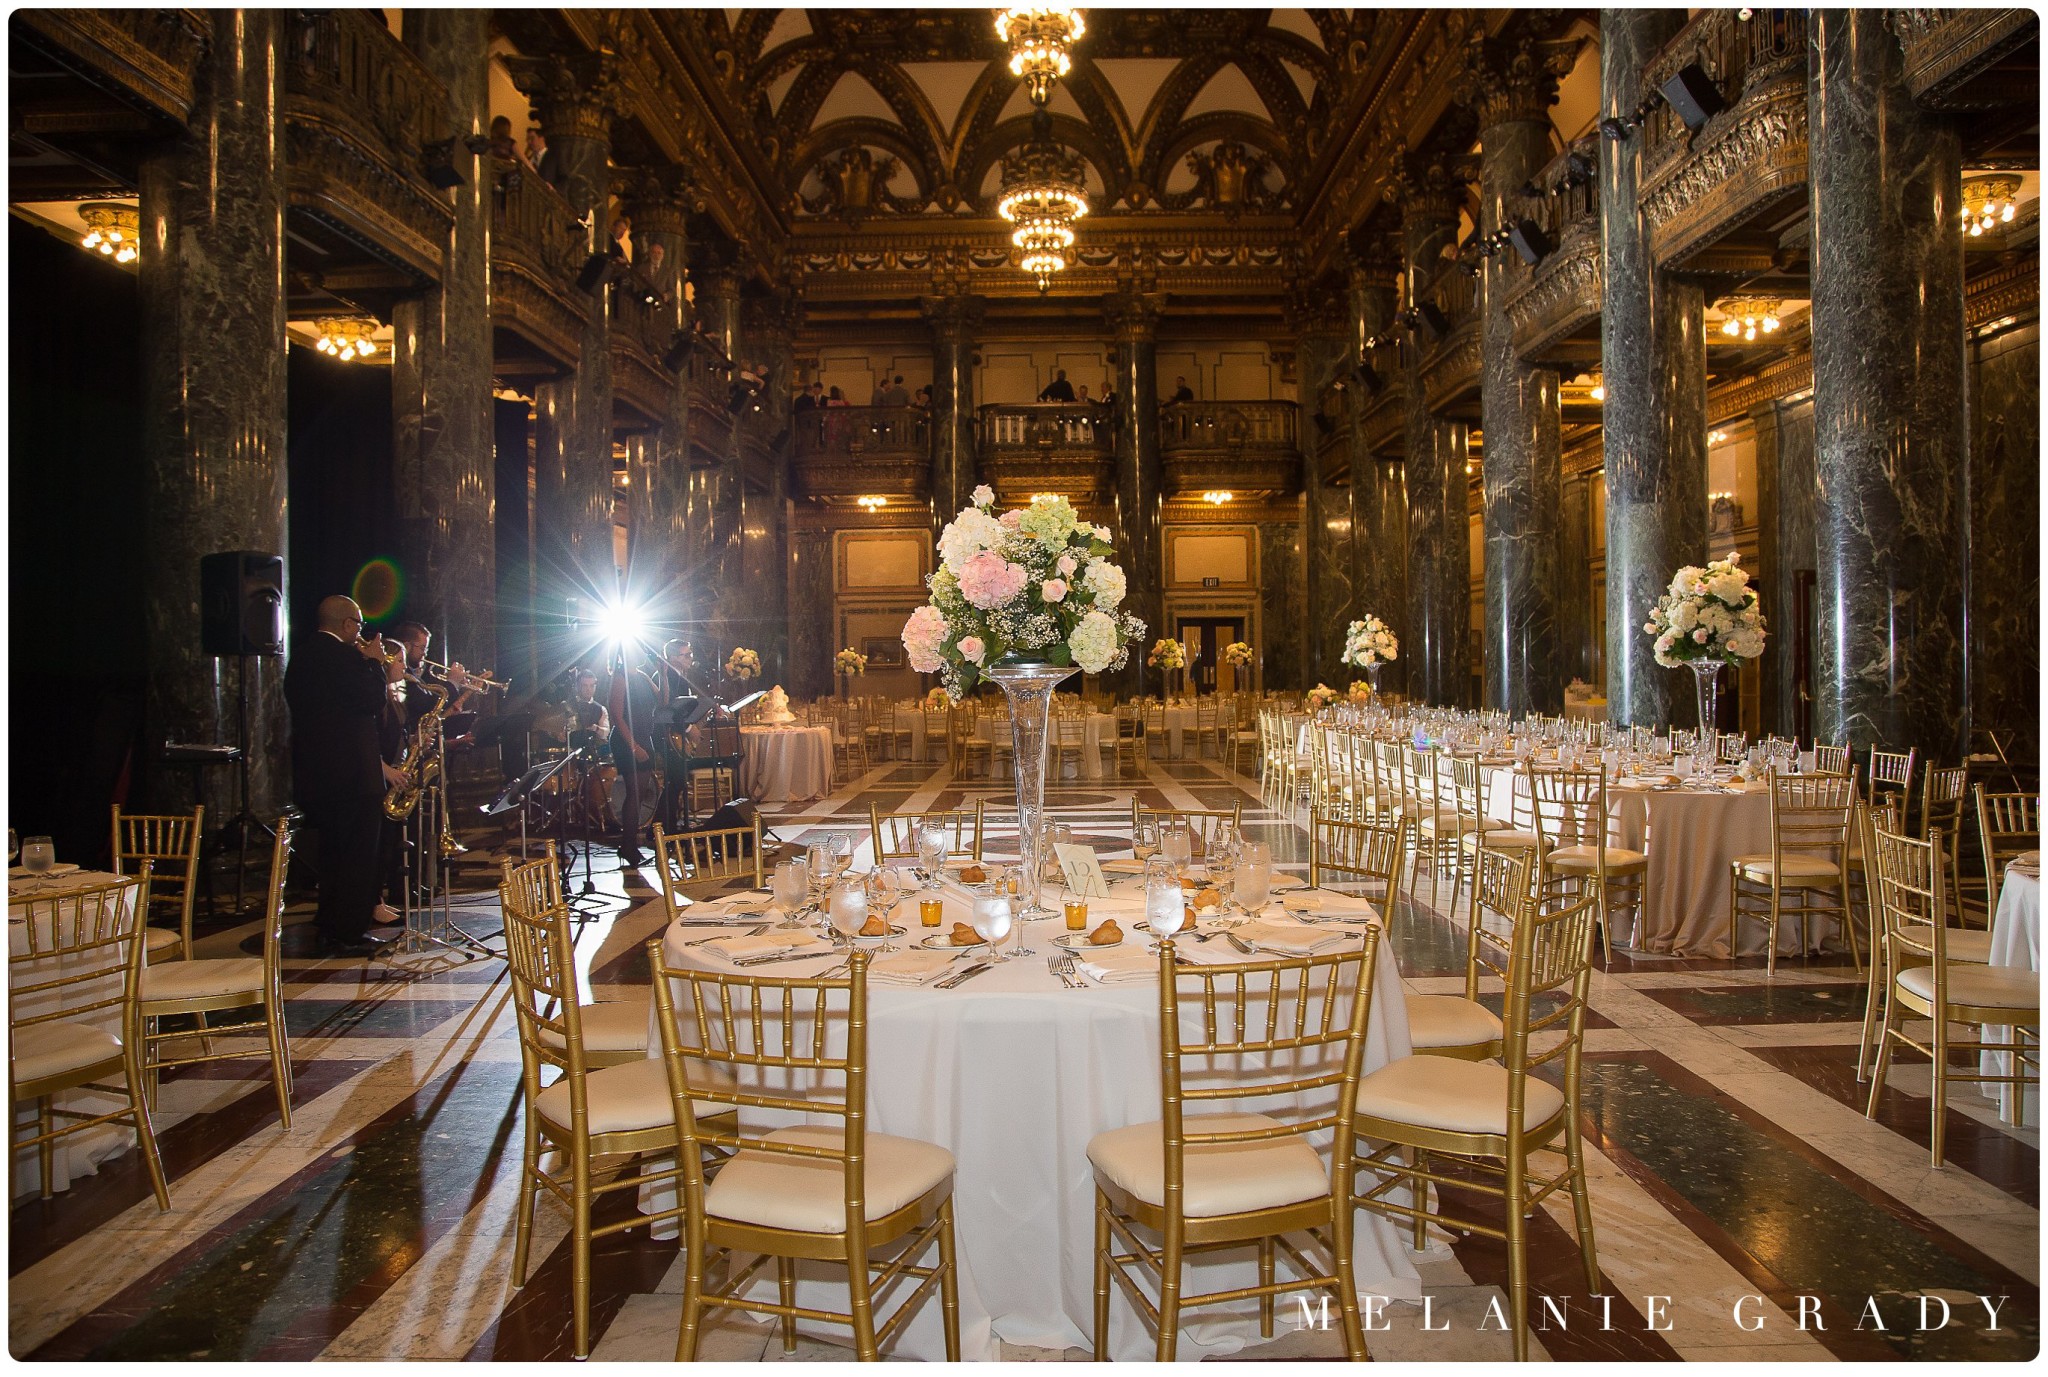 Carnegie Museum of Natural History Wedding in Pittsburgh, Pennsylvania. Tall floral centerpieces, gold chairs, Nashville wedding photographer